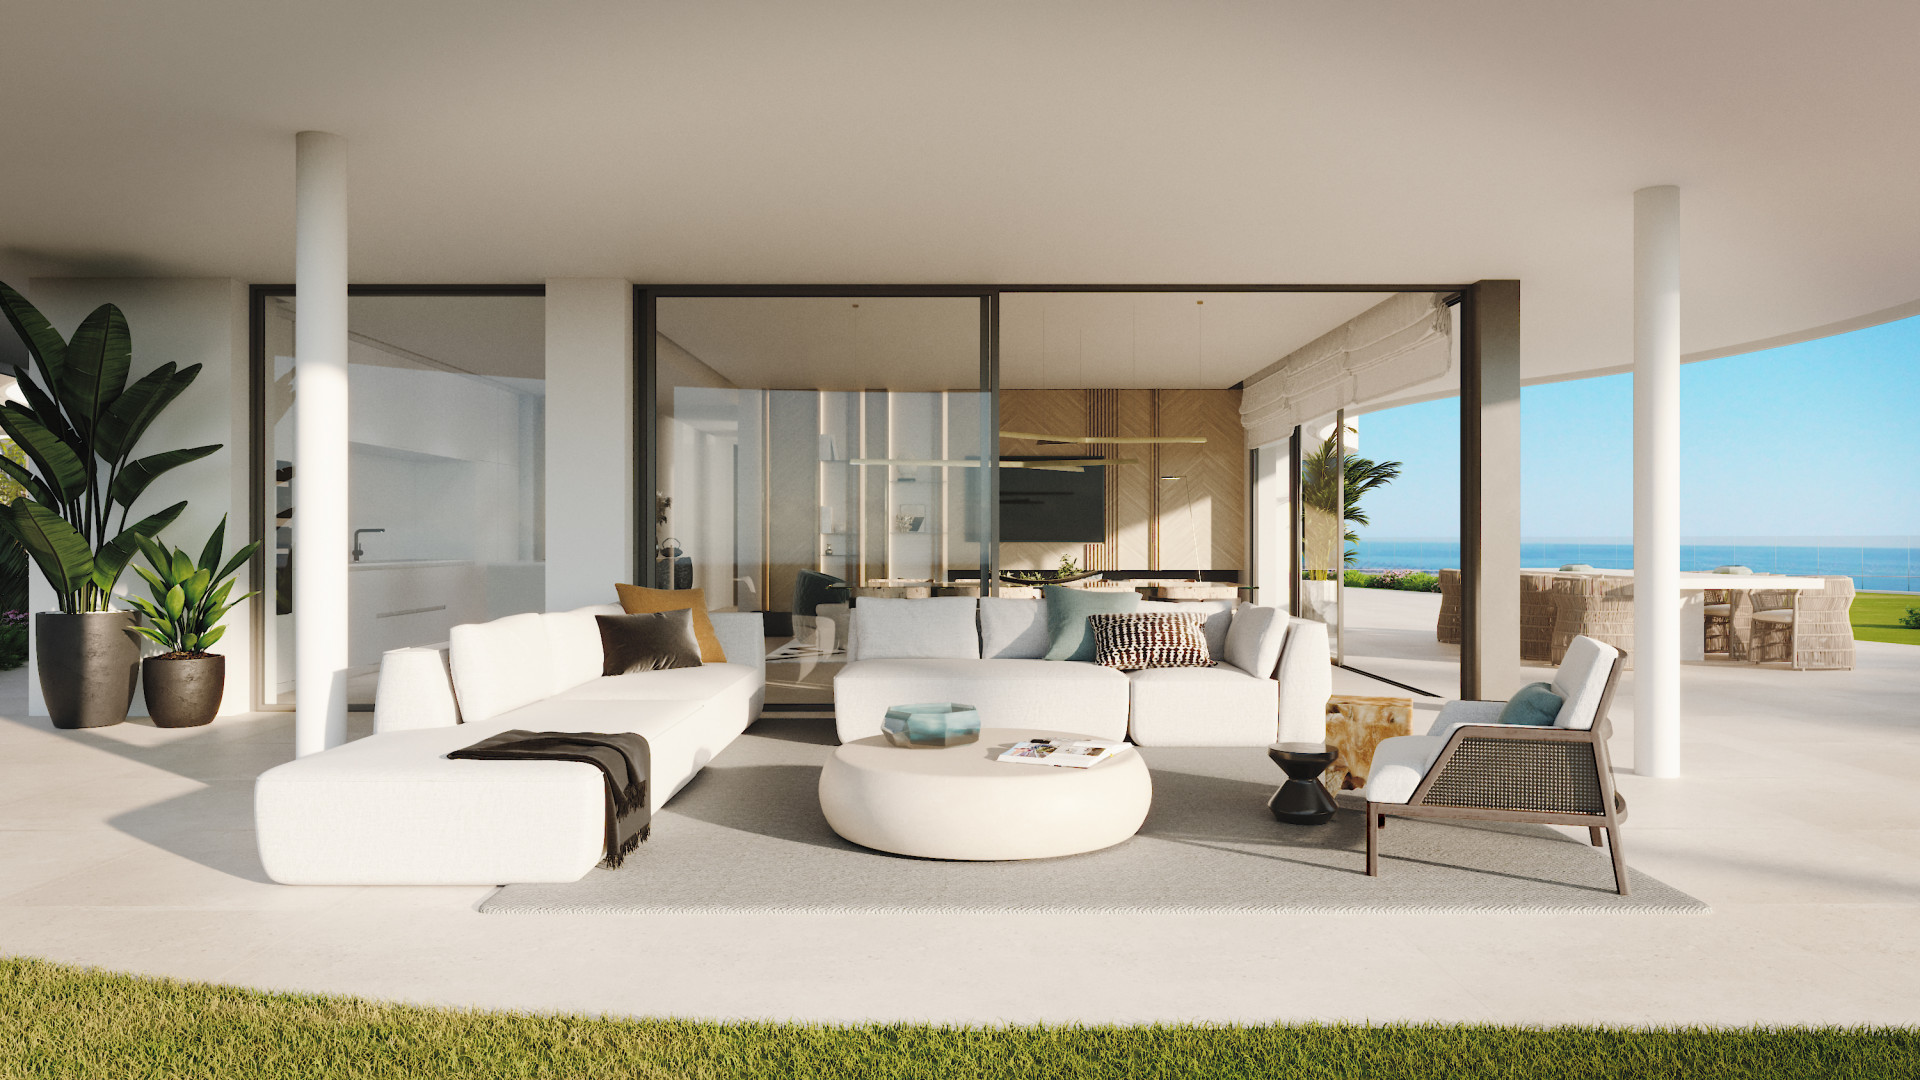 The View Marbella: Luxury project of 49 homes located in the hills of Benahavis, with panoramic views of the golf course and the sea. | Image 5